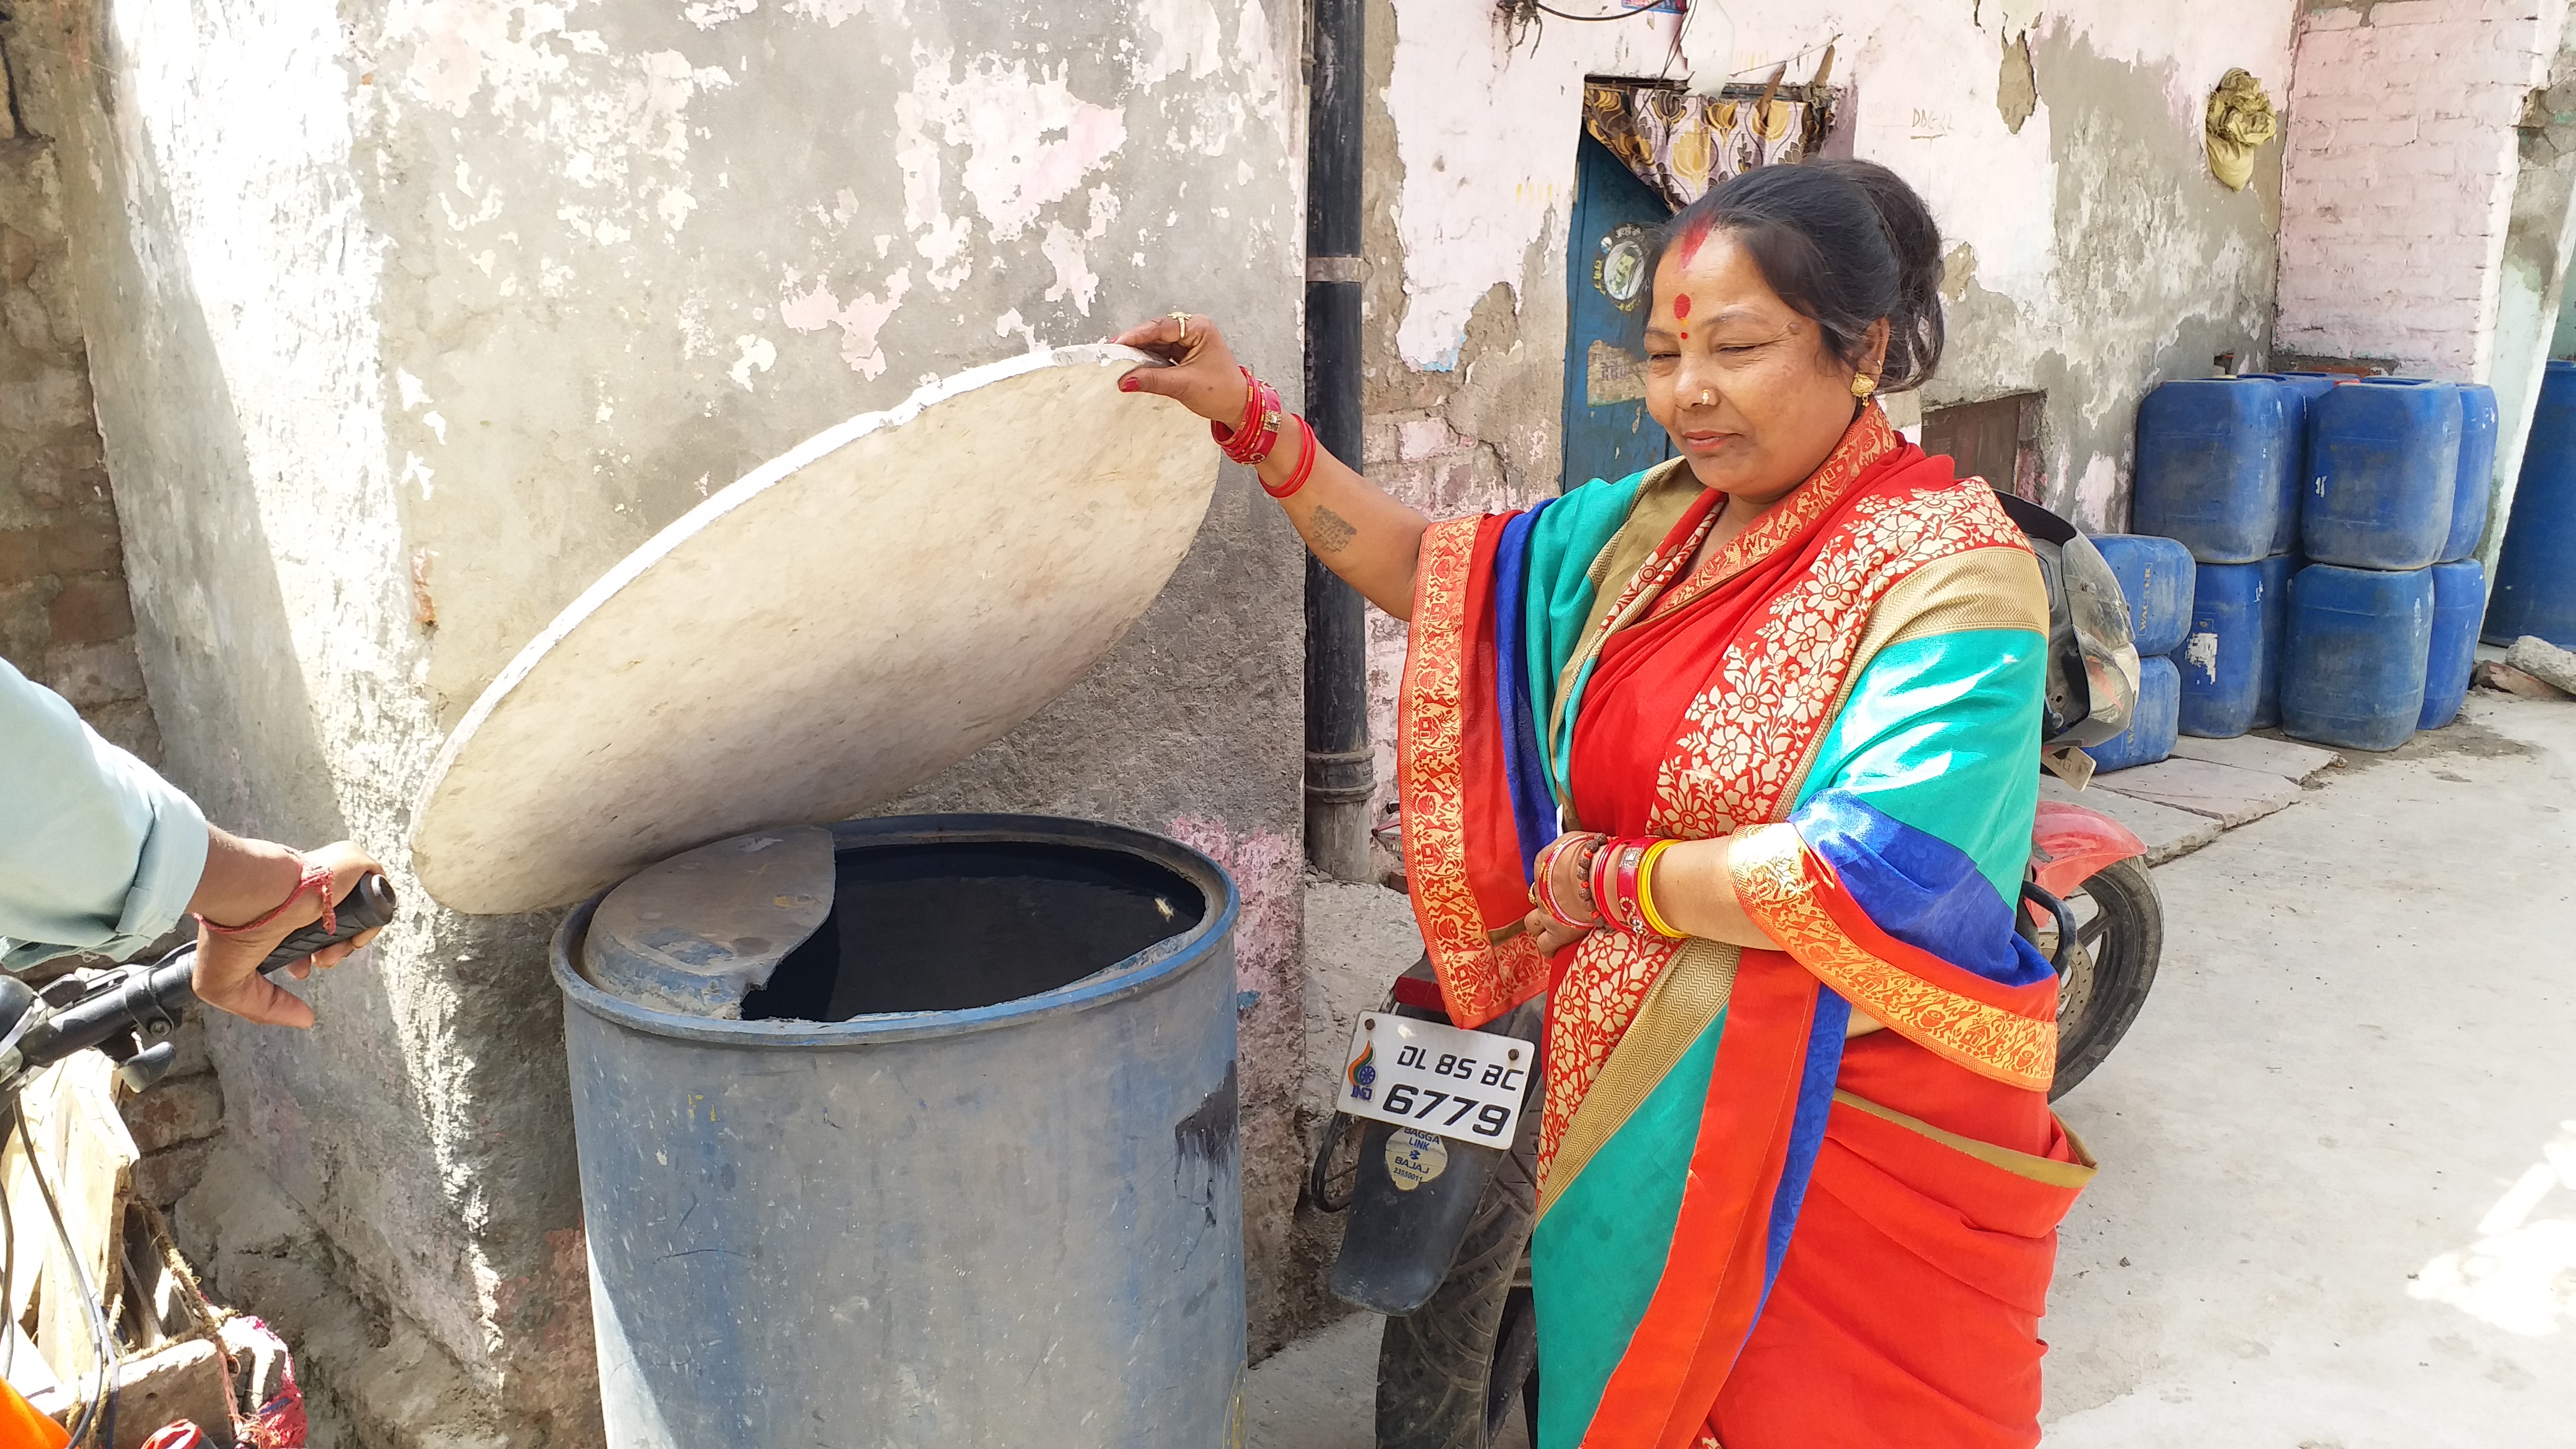 escape-without-water-coca-cola-comes-out-of-pipeline-in-swami-shraddhanand-colony-people-forced-to-sell-houses